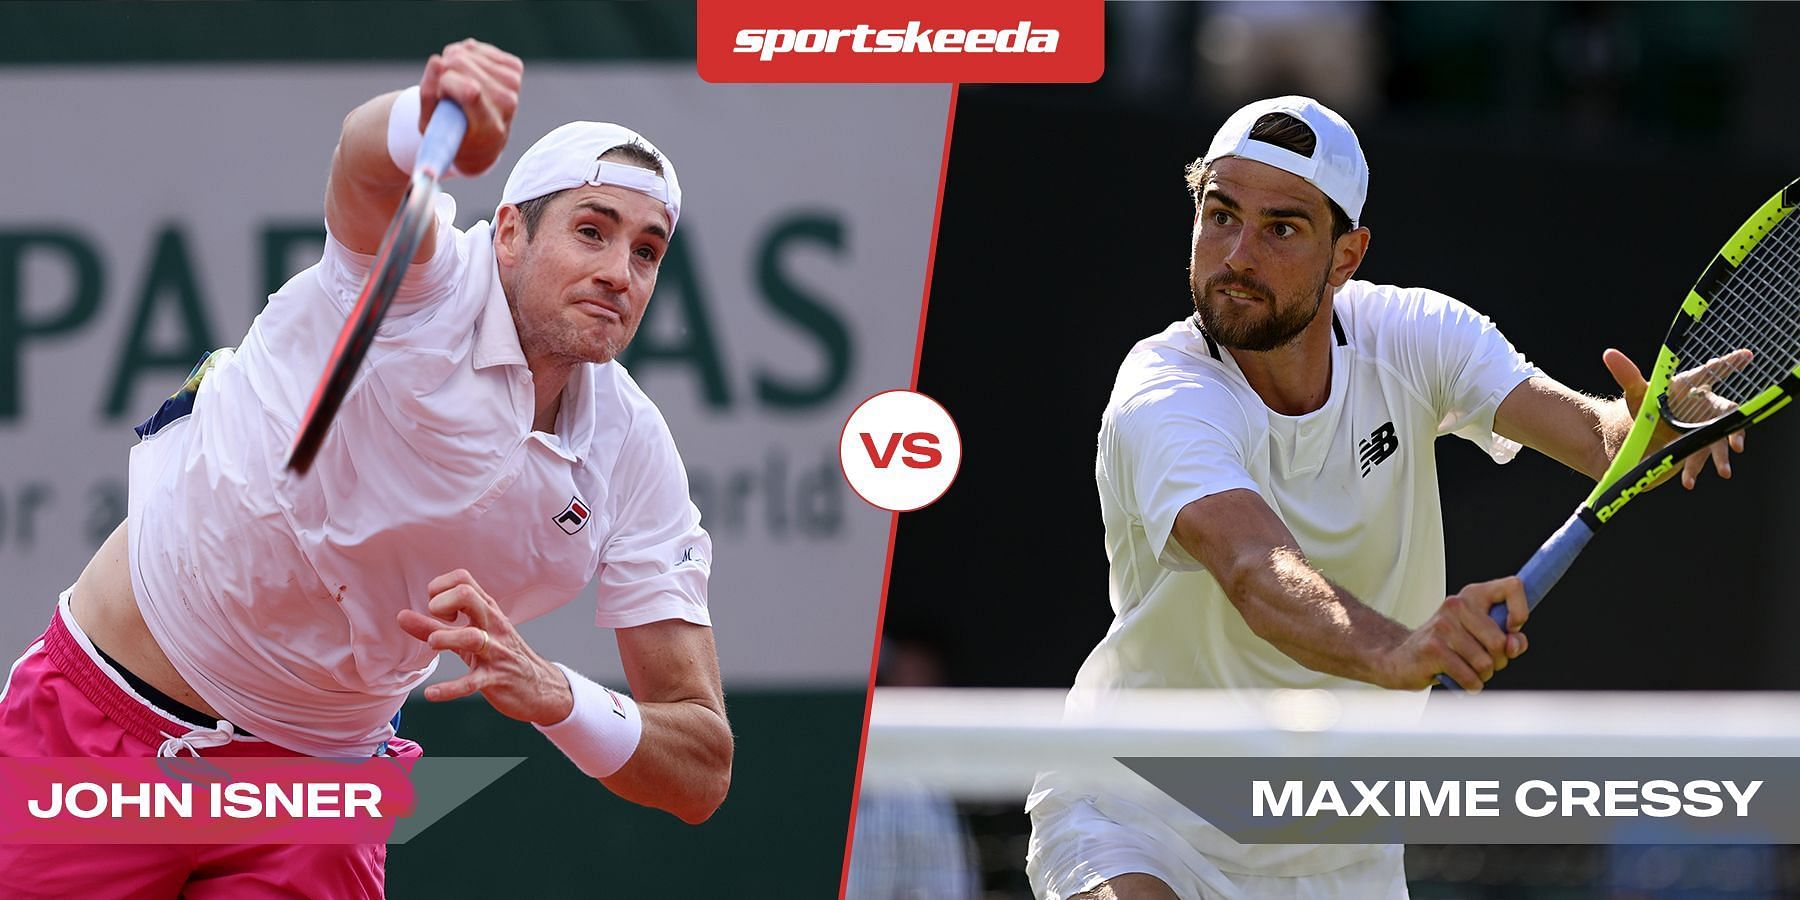 Newport 2022 John Isner vs Maxime Cressy preview, head-to-head, prediction, odds and pick Hall of Fame Open